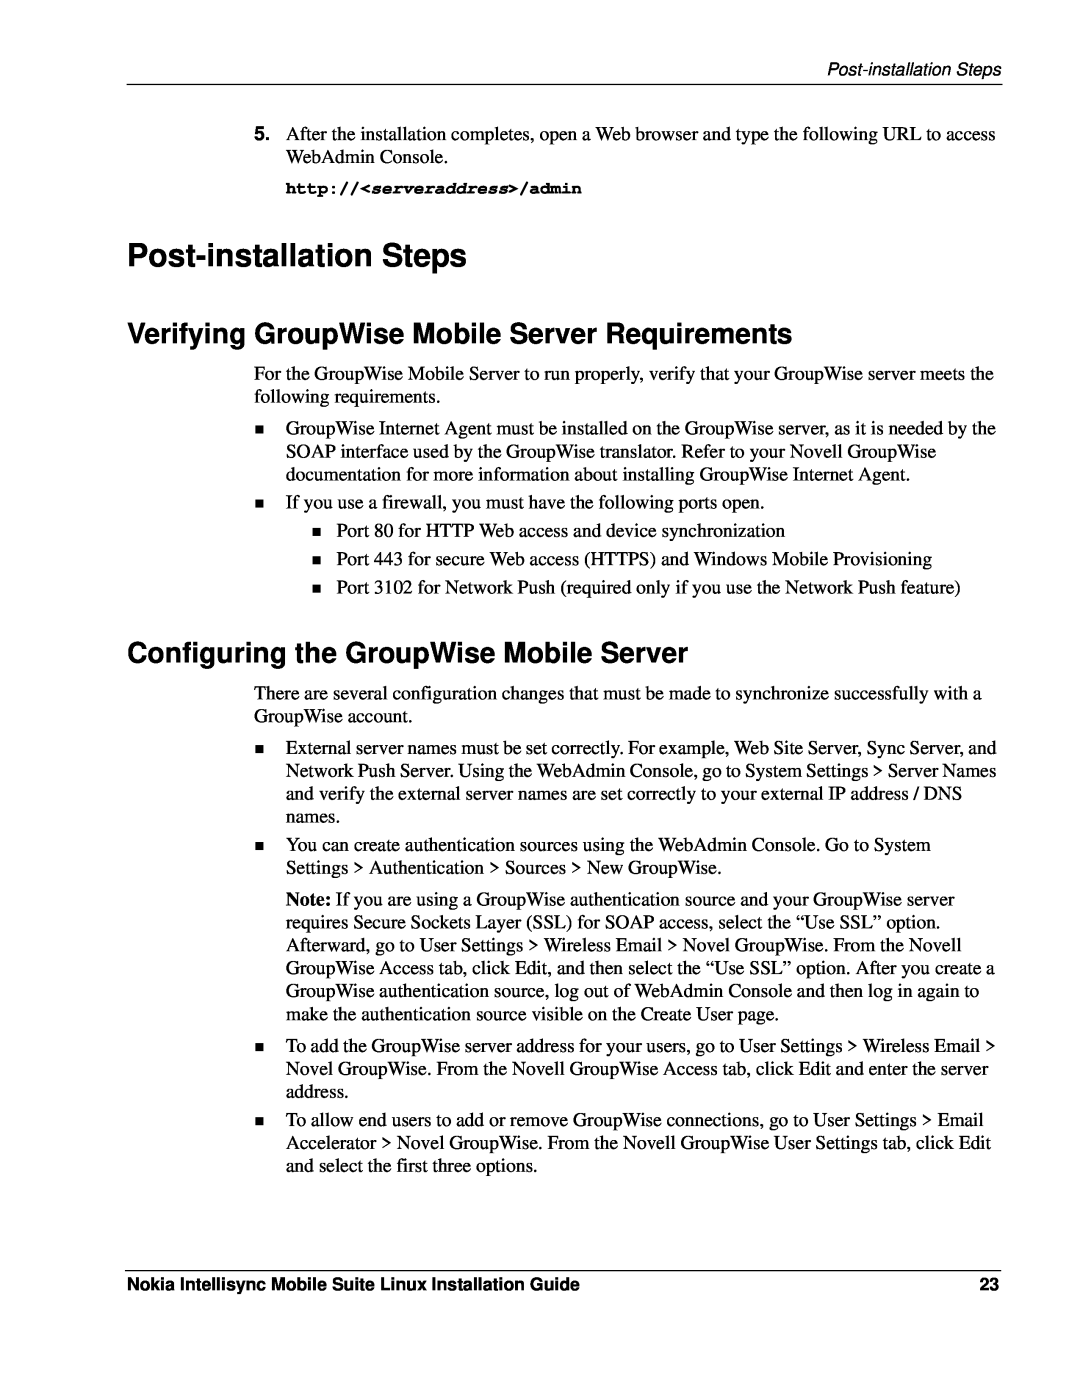 Nokia 8.5 Post-installationSteps, Verifying GroupWise Mobile Server Requirements, Configuring the GroupWise Mobile Server 